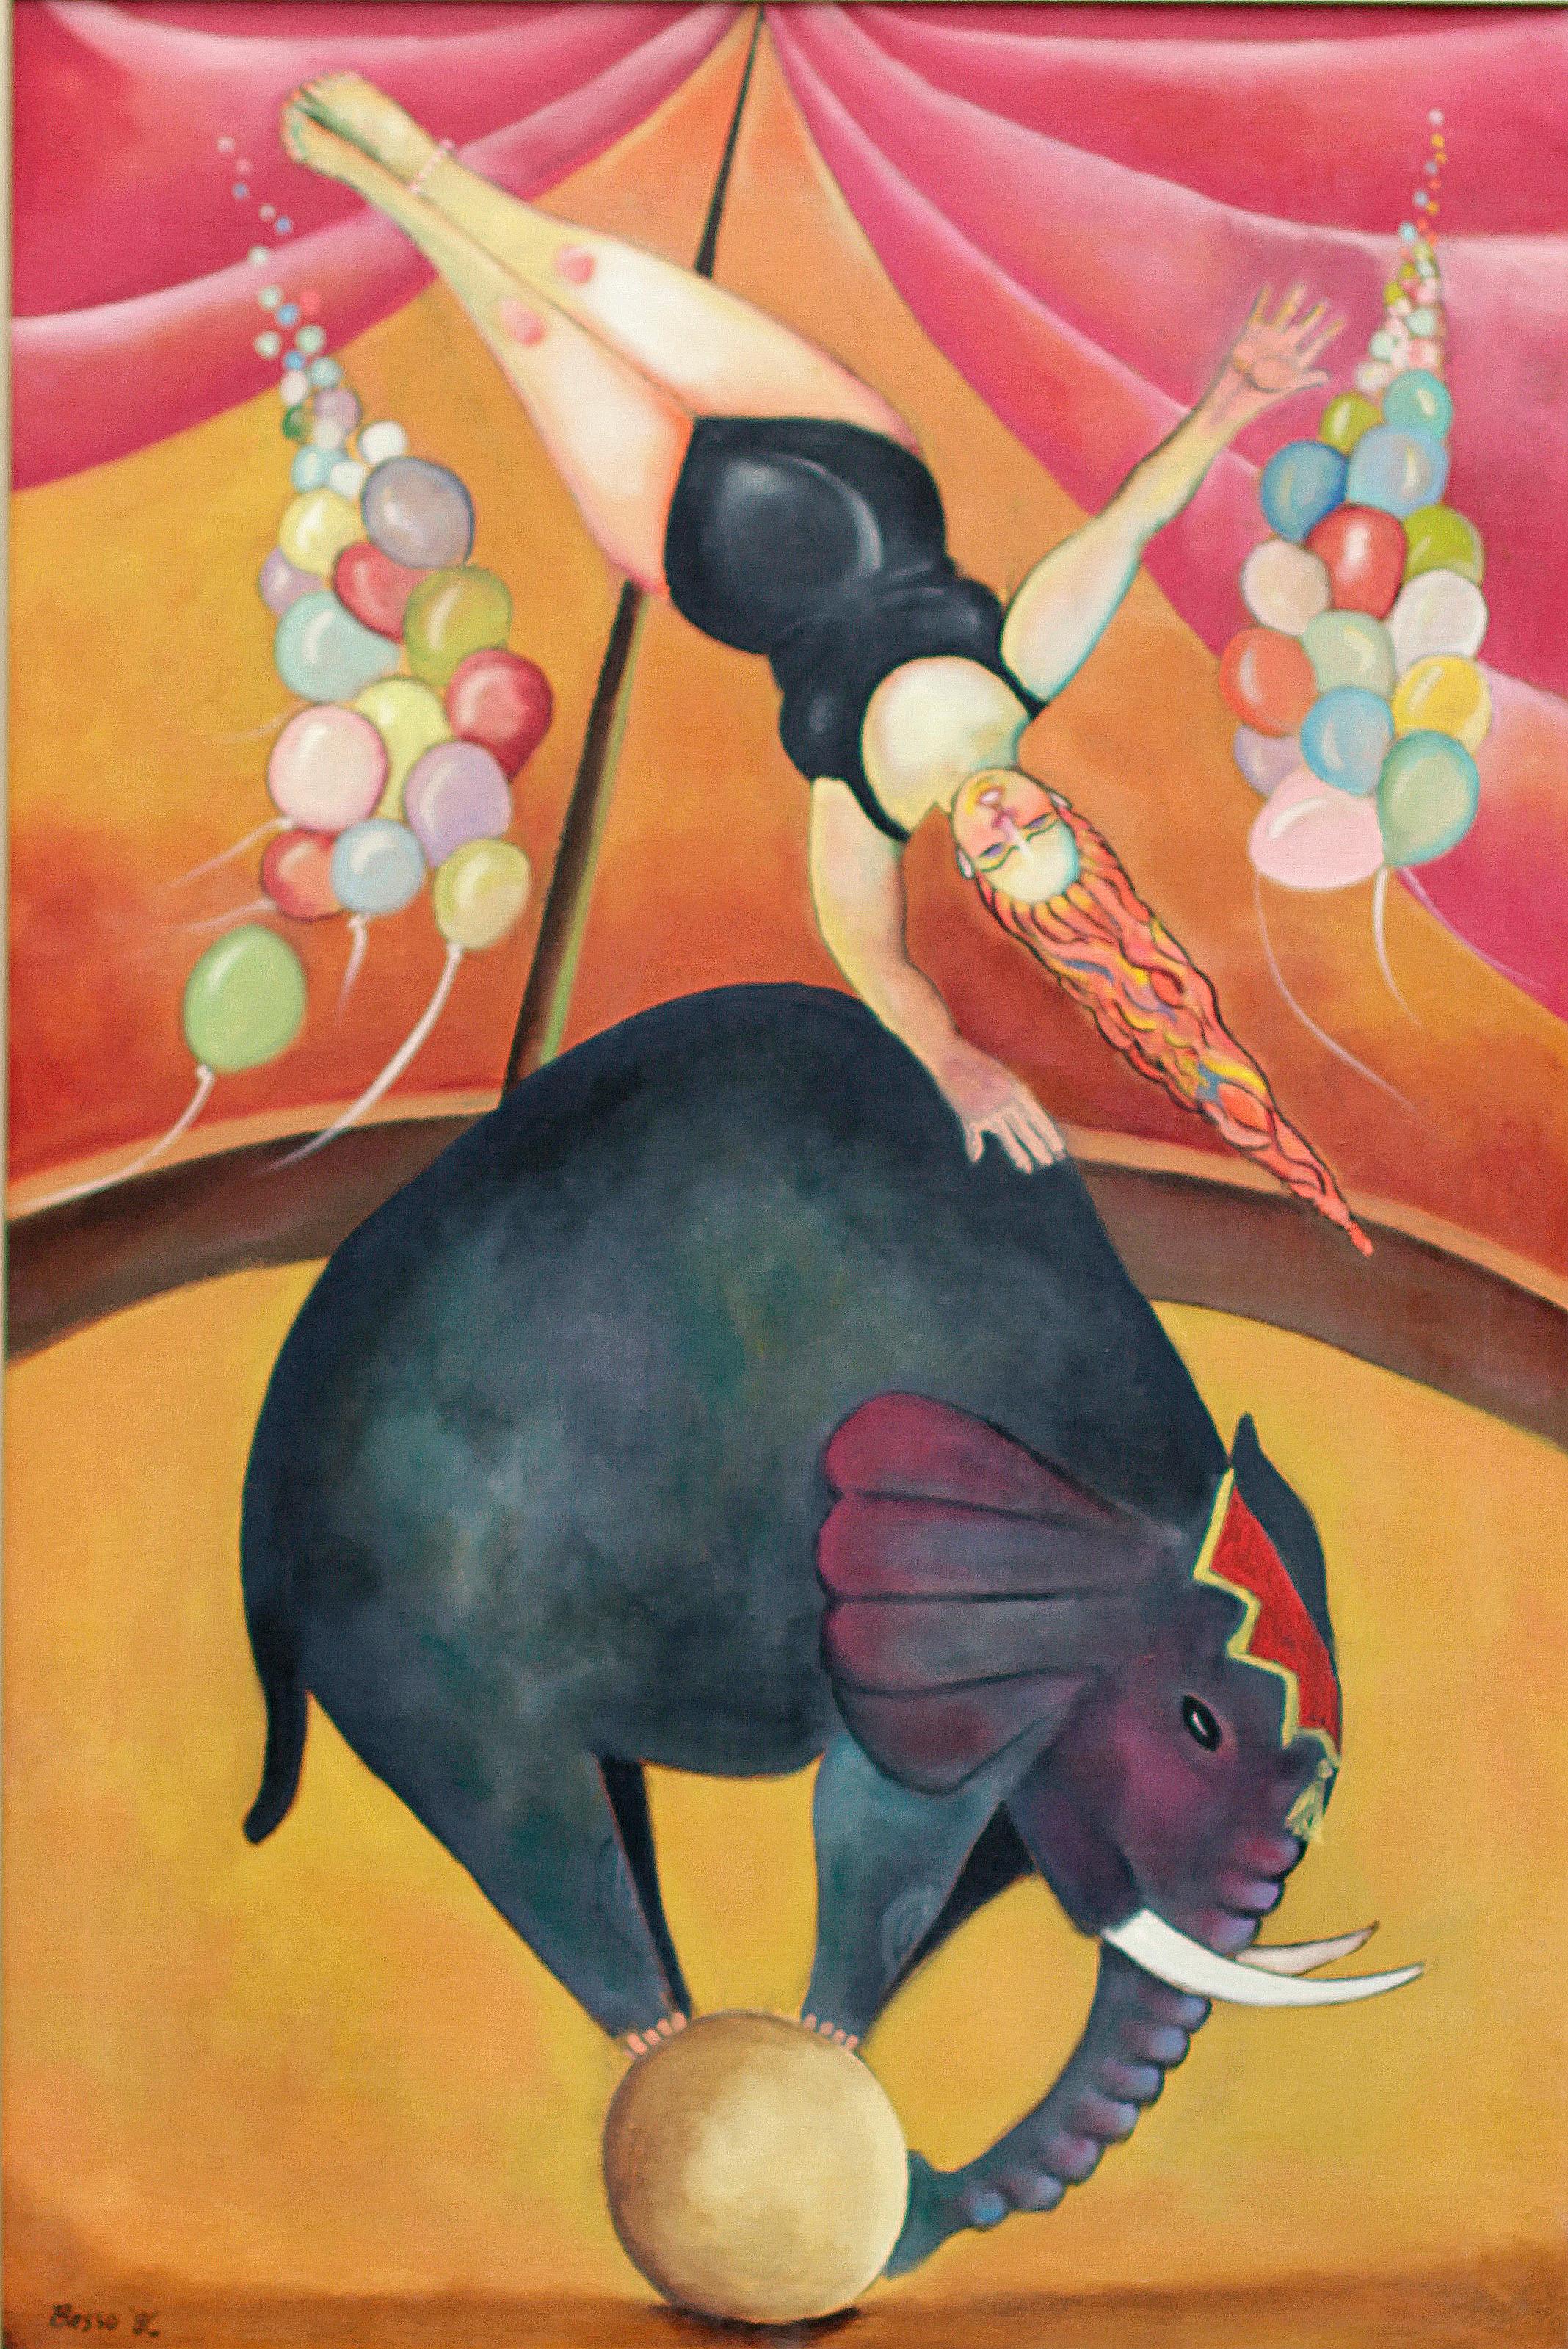 circus rider, colorful circus theme interior woman and elephant bright cheerful 